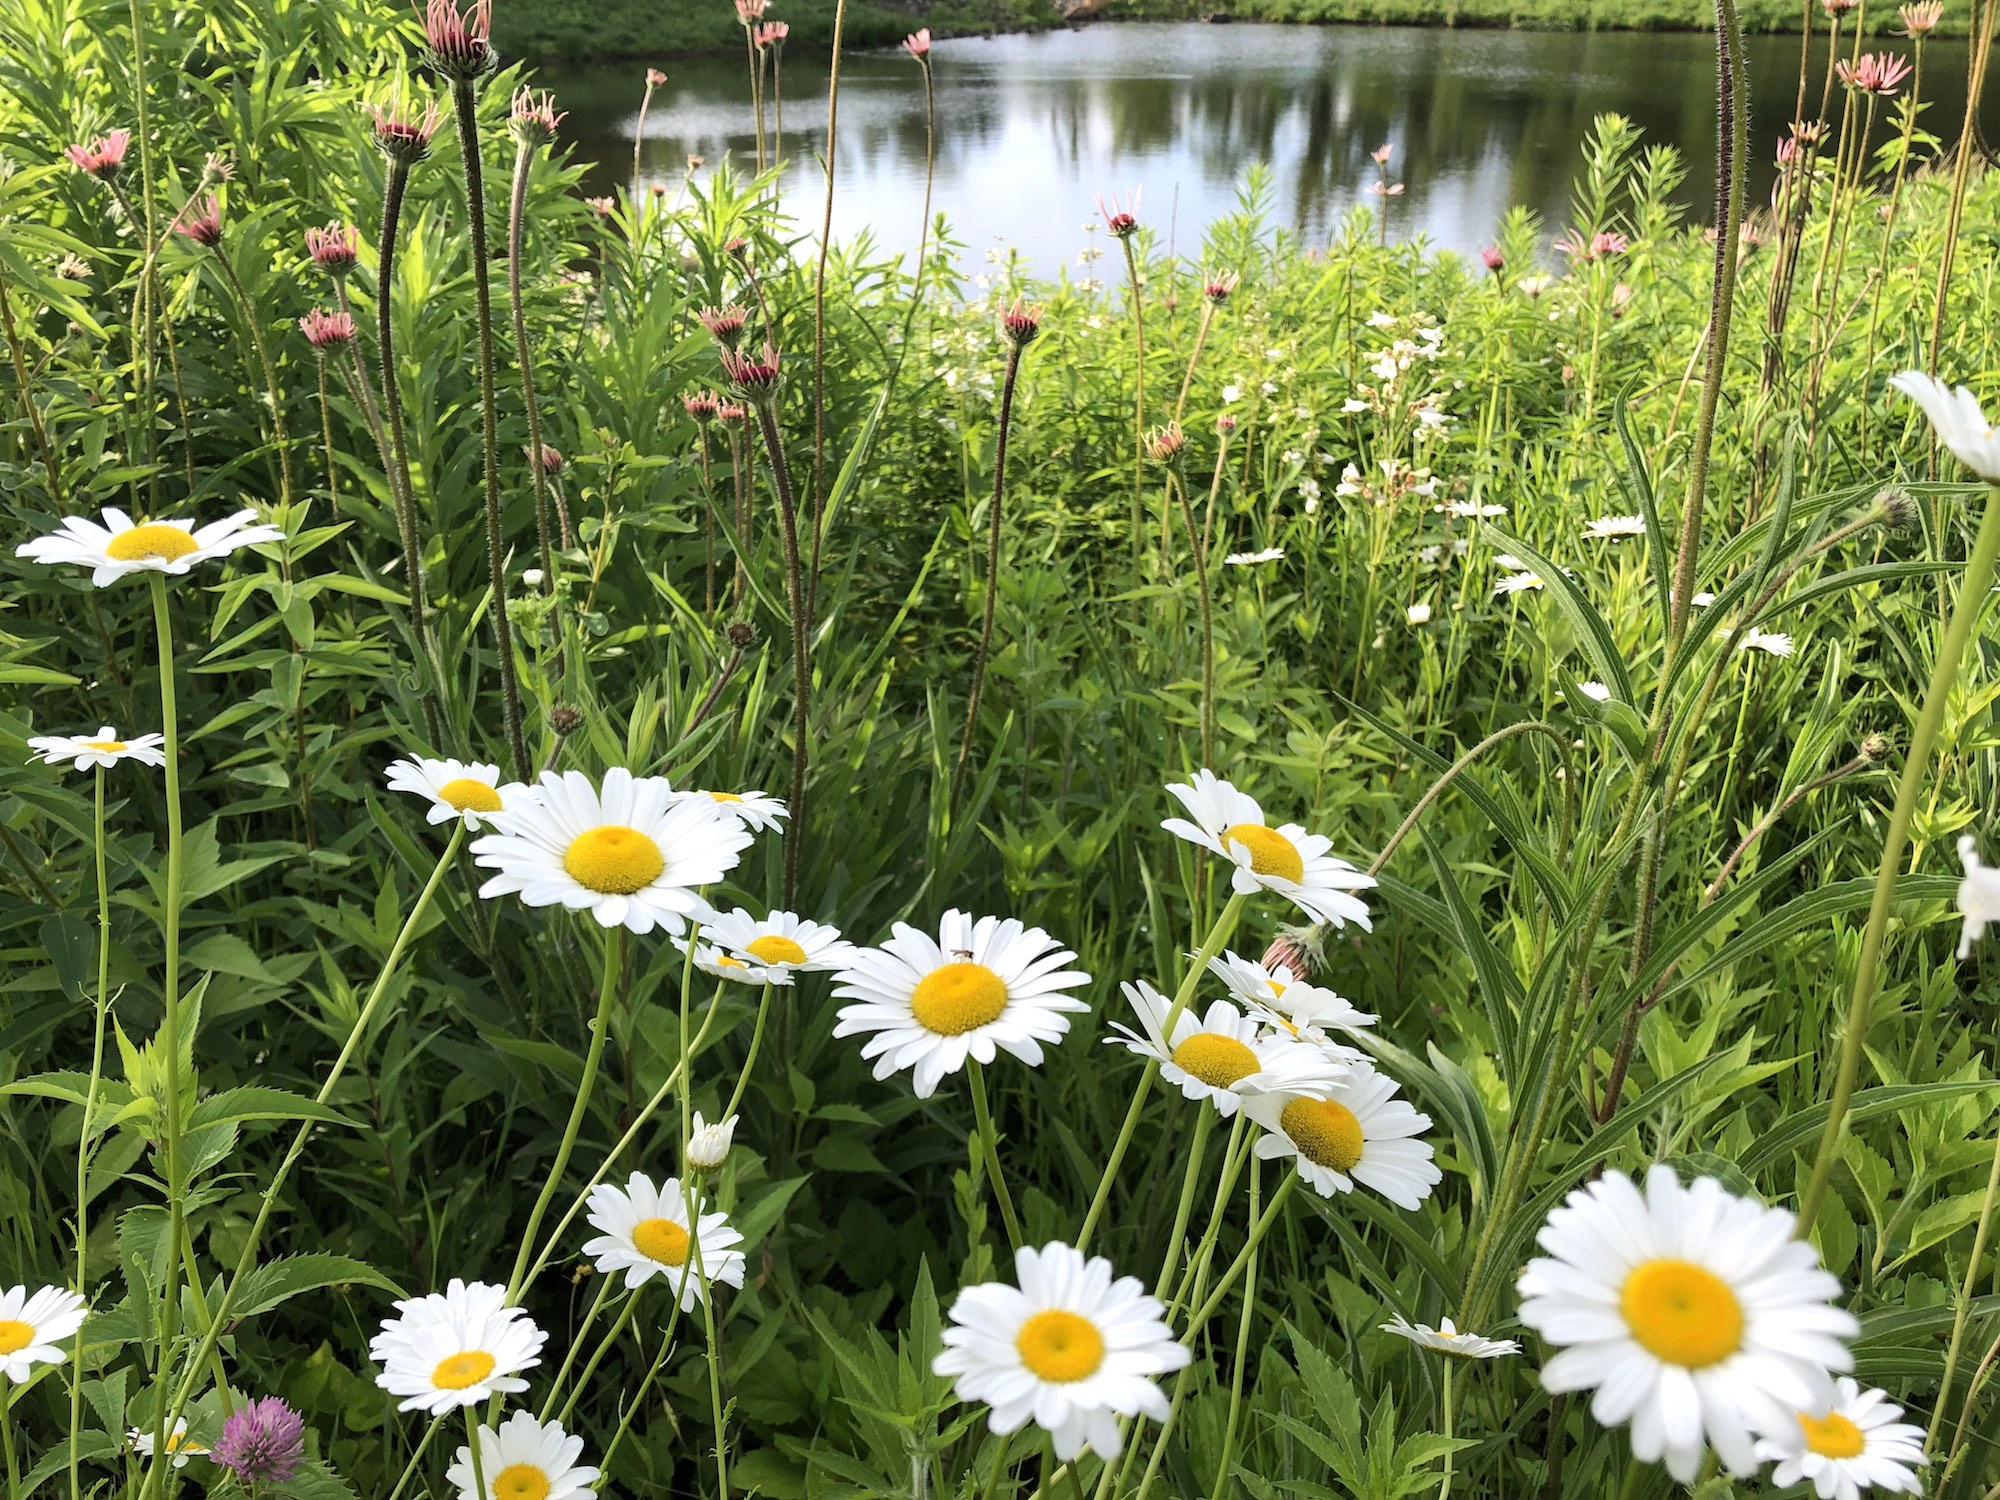 Ox-eye Daisies on bank of retaining pond at the corner of Manitou Way and Nakoma Road in Madison, Wisconsin on June 20, 2019.